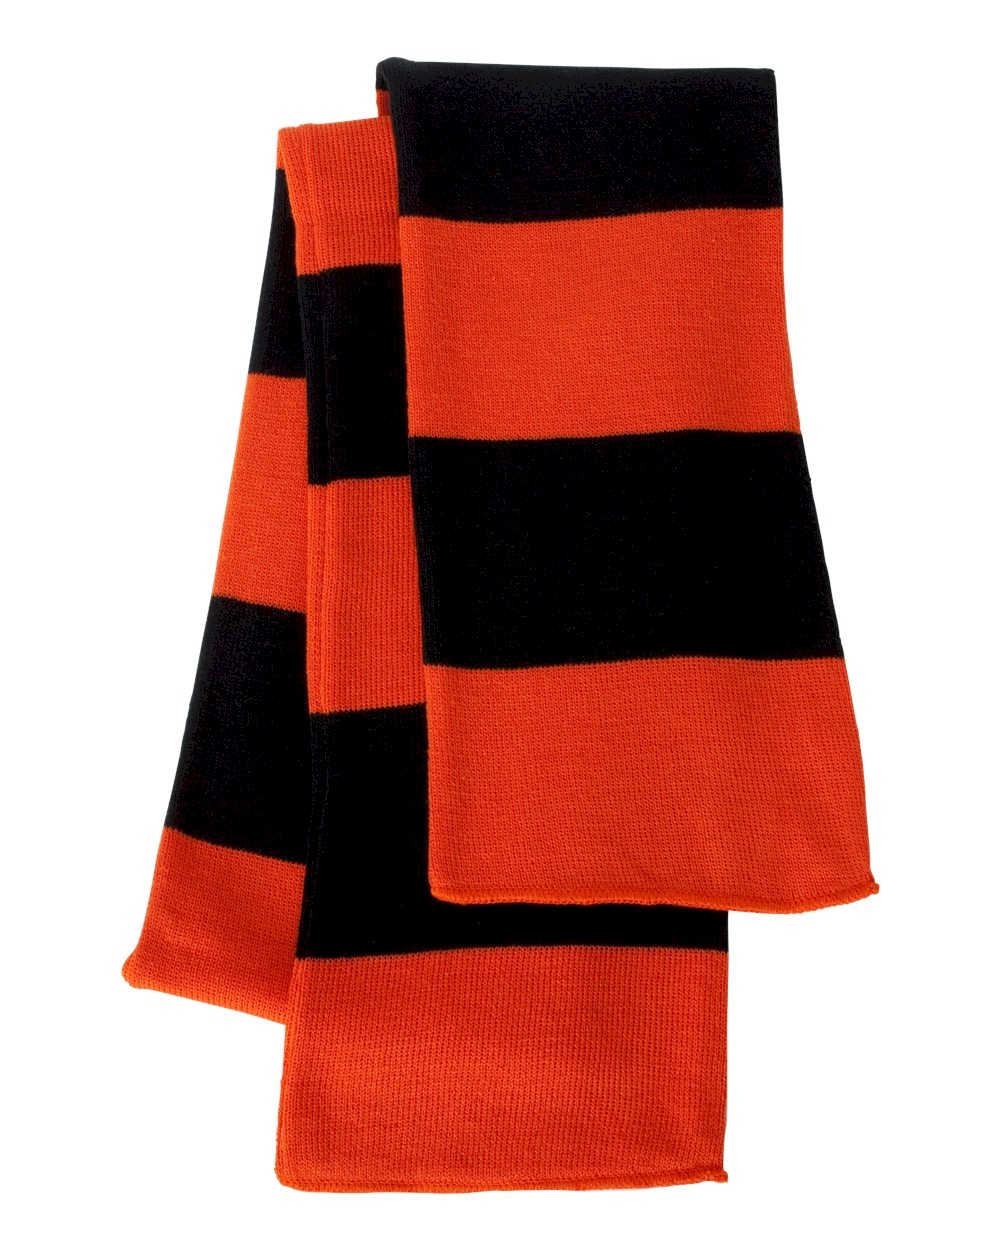 Rugby Striped Knit Scarf Embroidery Blanks - ORANGE/BLACK